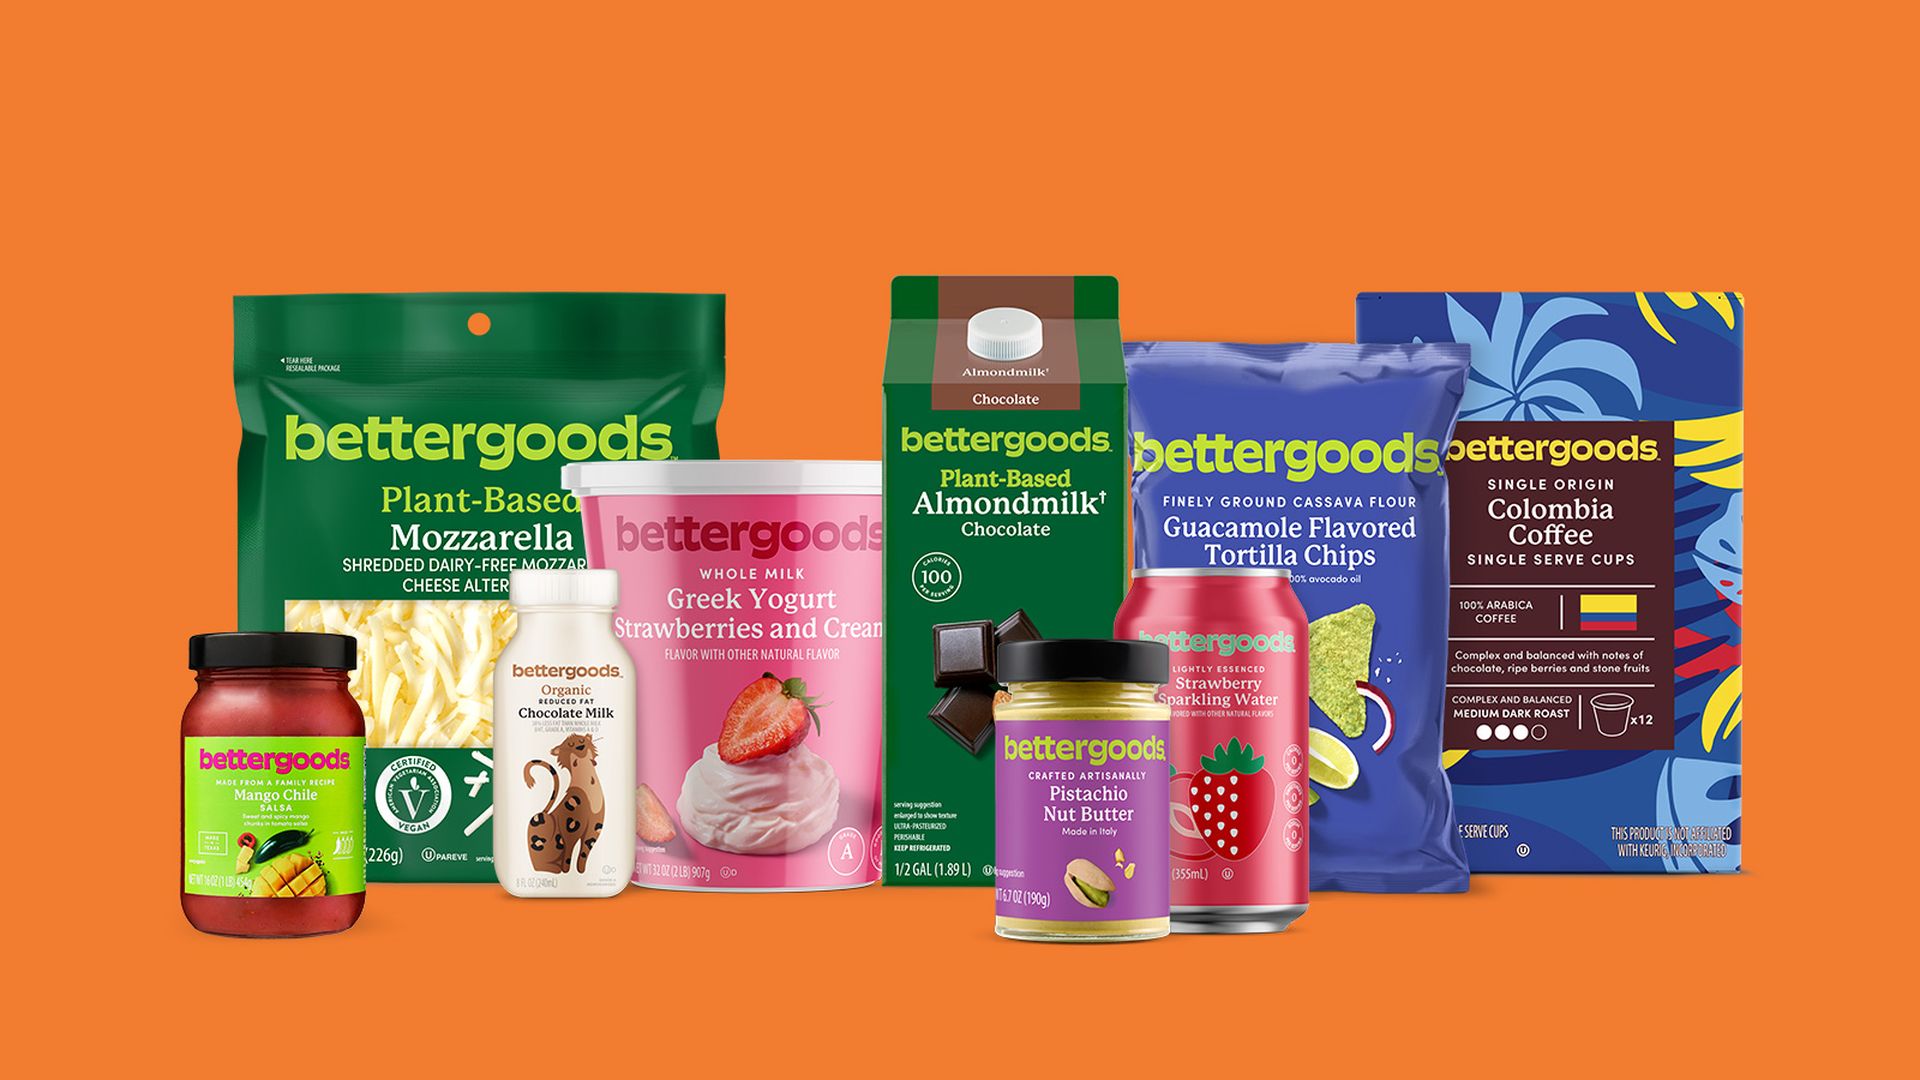 Display of products from Walmart’s new brand “bettergoods.”